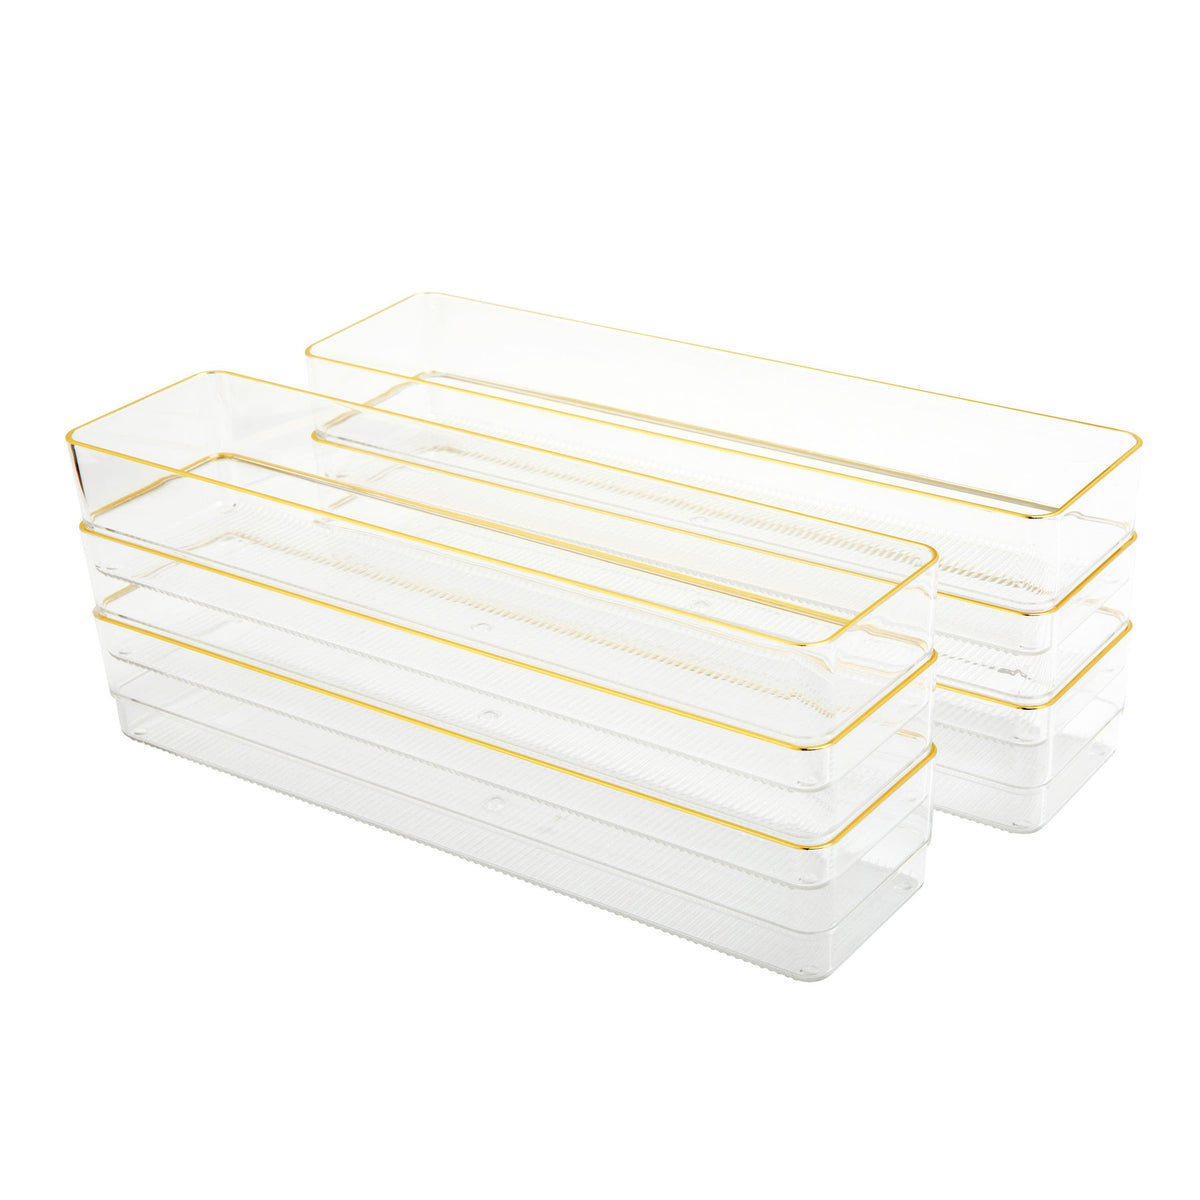 Set of 6 Plastic Stacking Desk Drawer Organizers with Gold Trim - 12 x 3